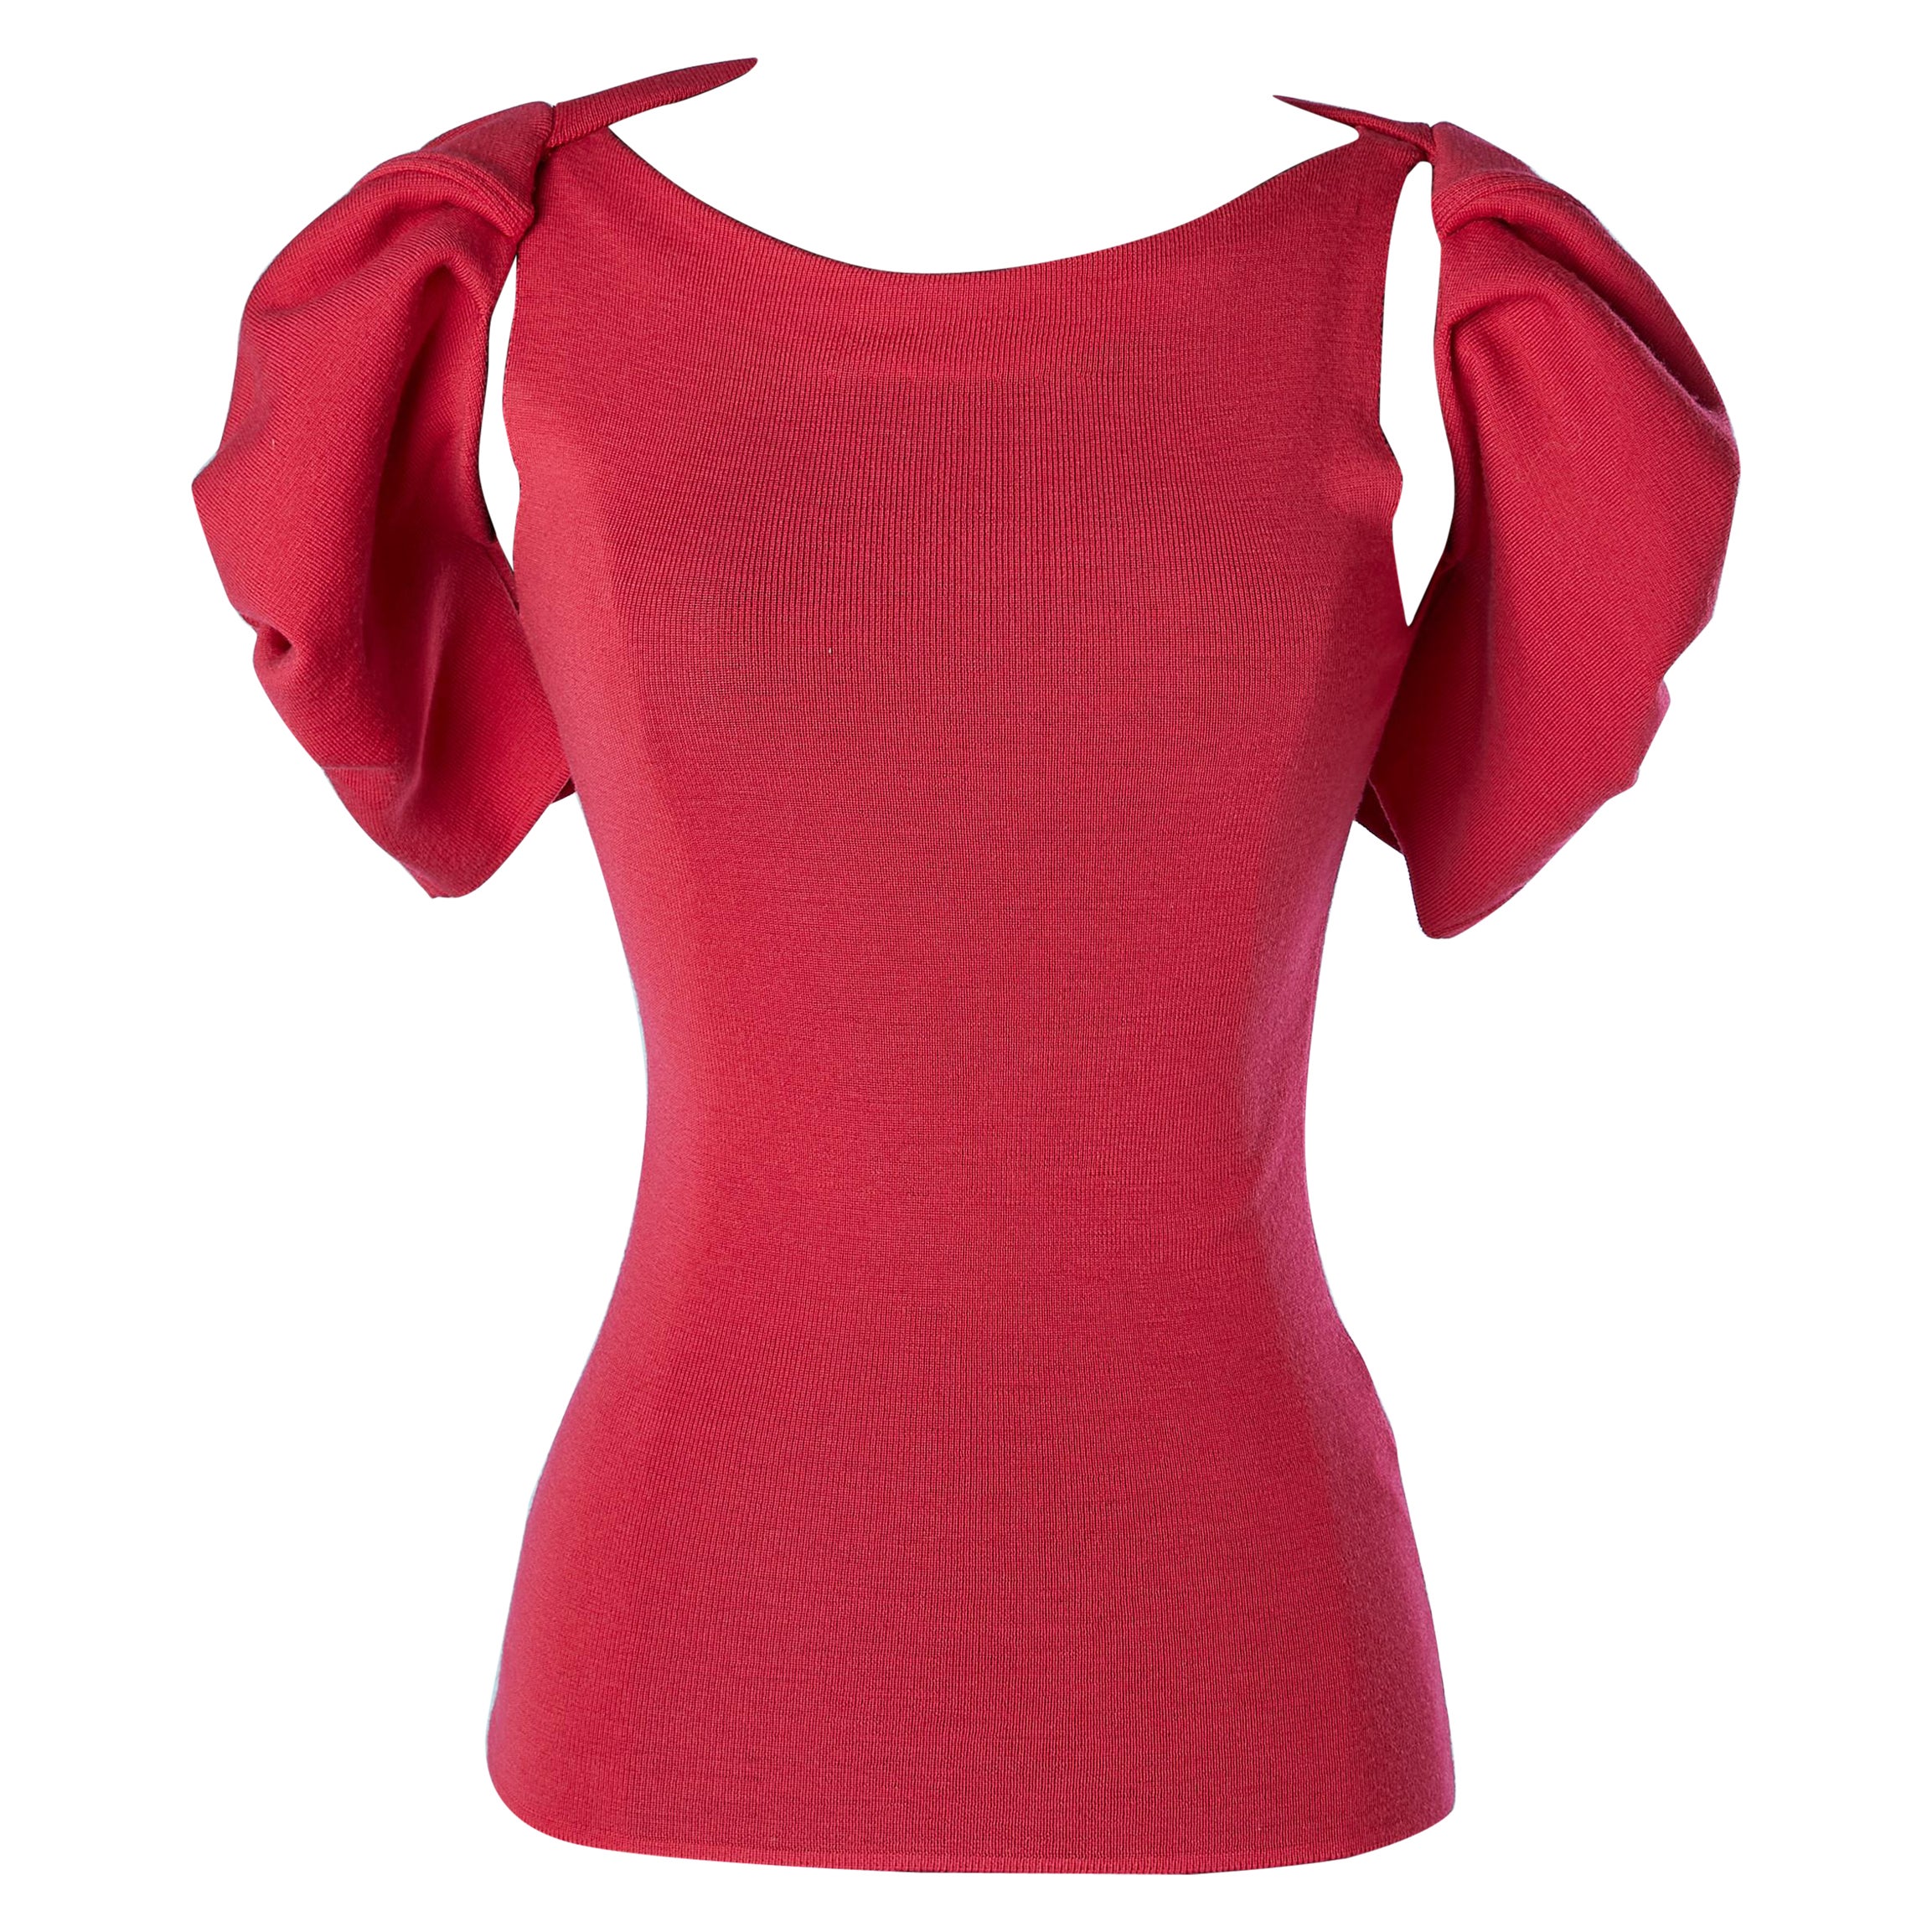 Raspberry pink wool knit tank-top and boléro. For Sale